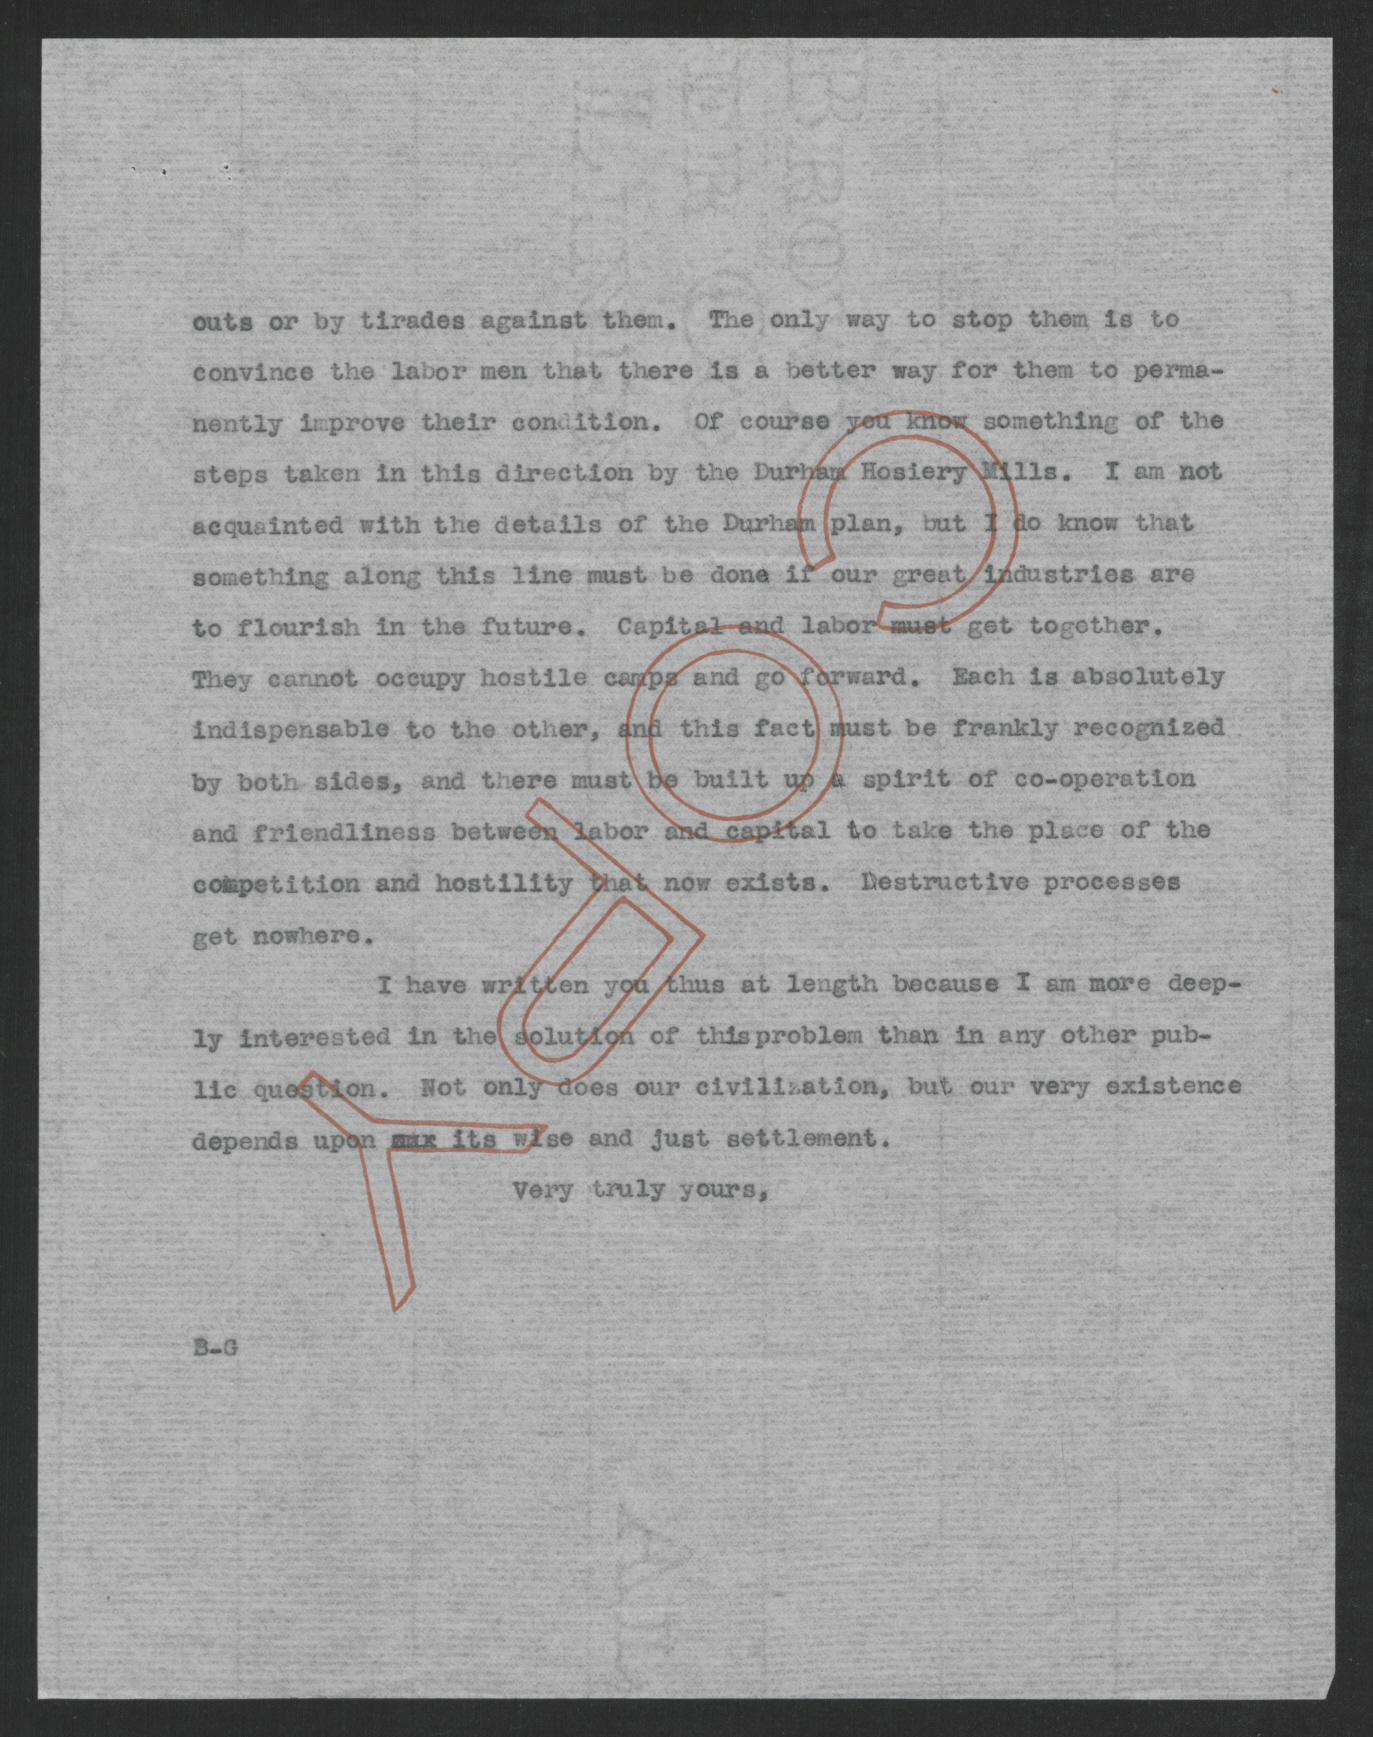 Letter from Thomas W. Bickett to David Clark, June 17, 1919, page 2